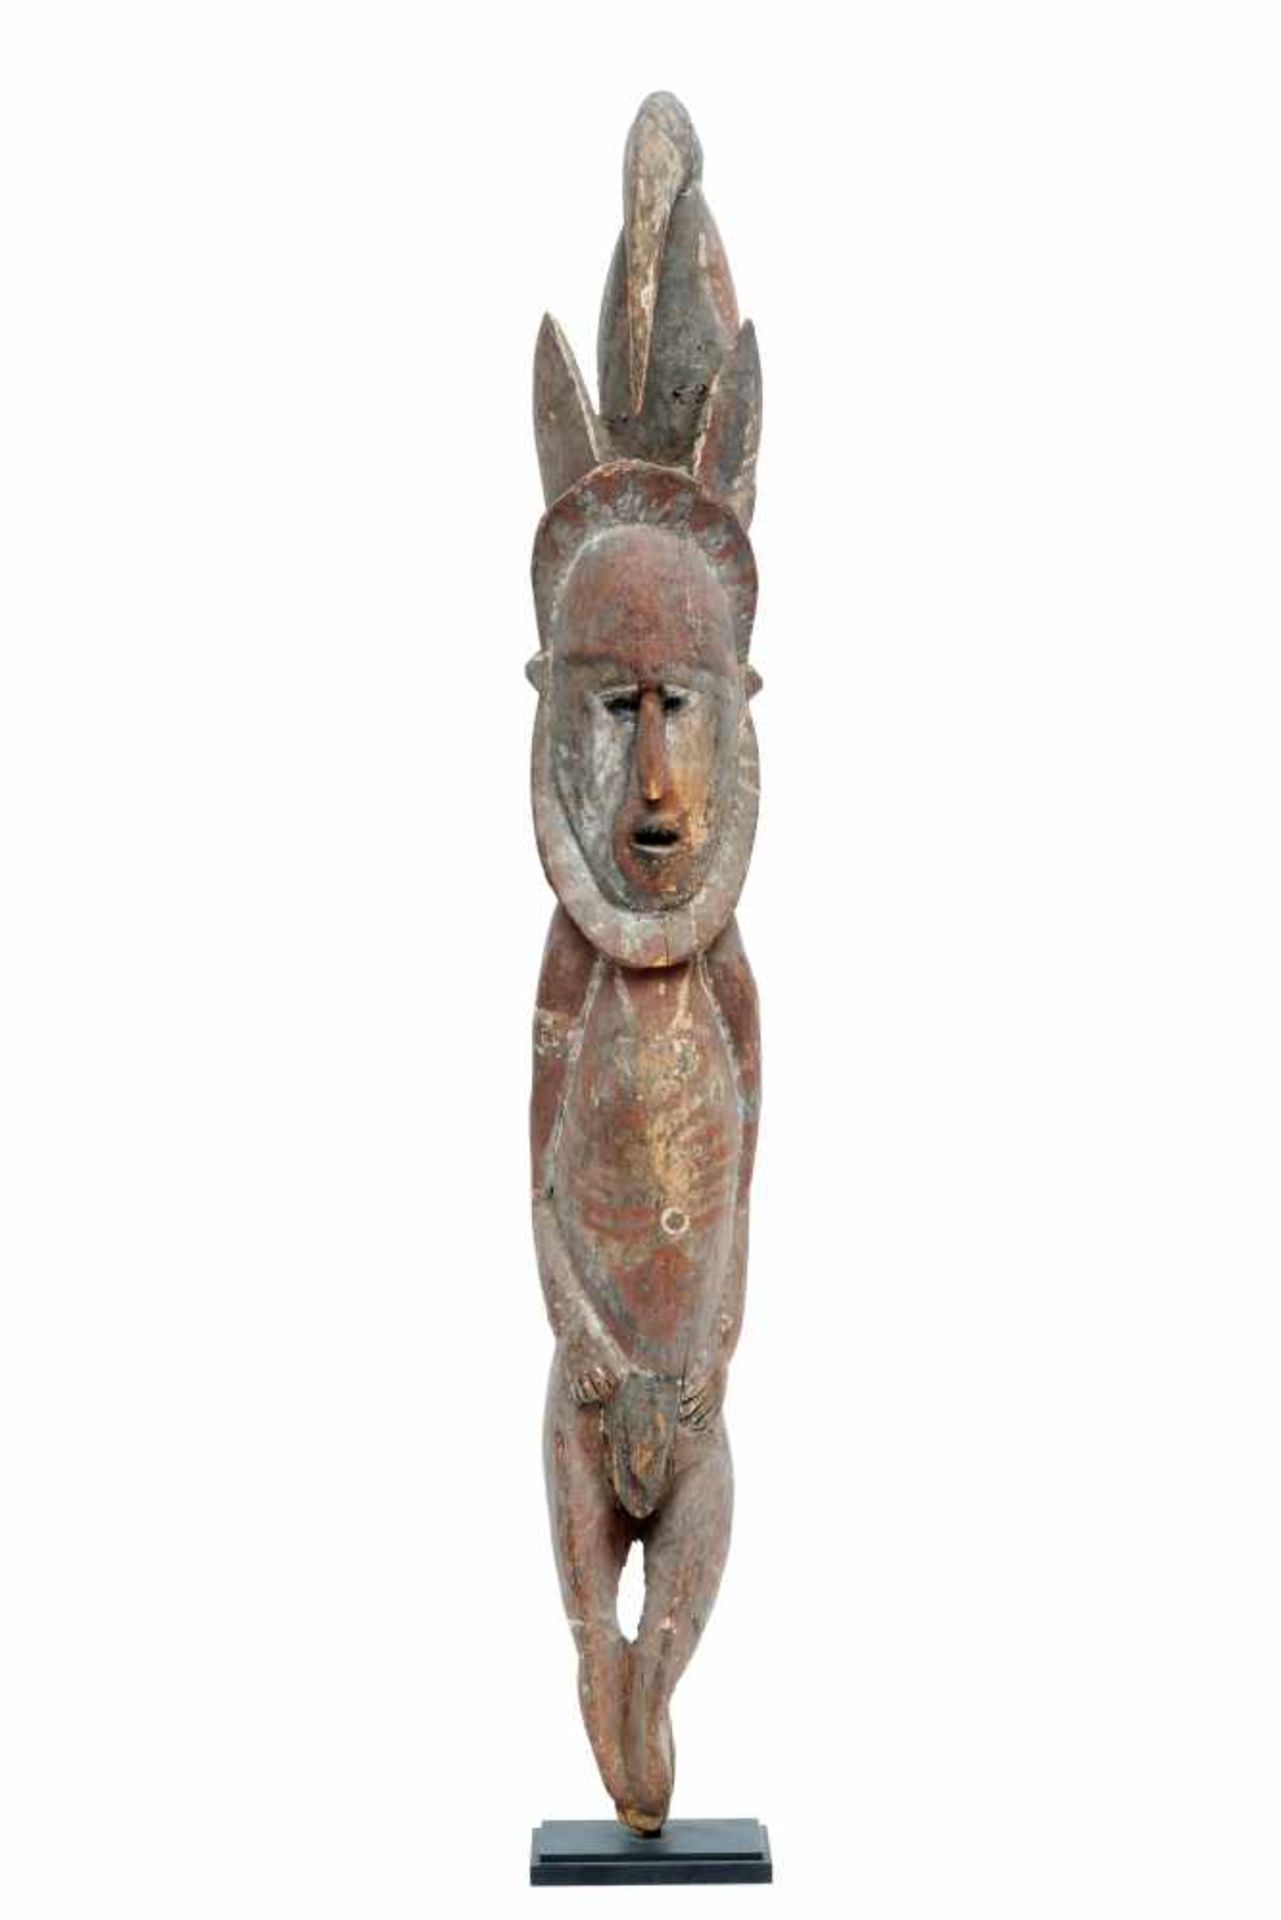 PNG, Abelam, wooden ancestral figurewith large open mouth, carved lining on face and beard and